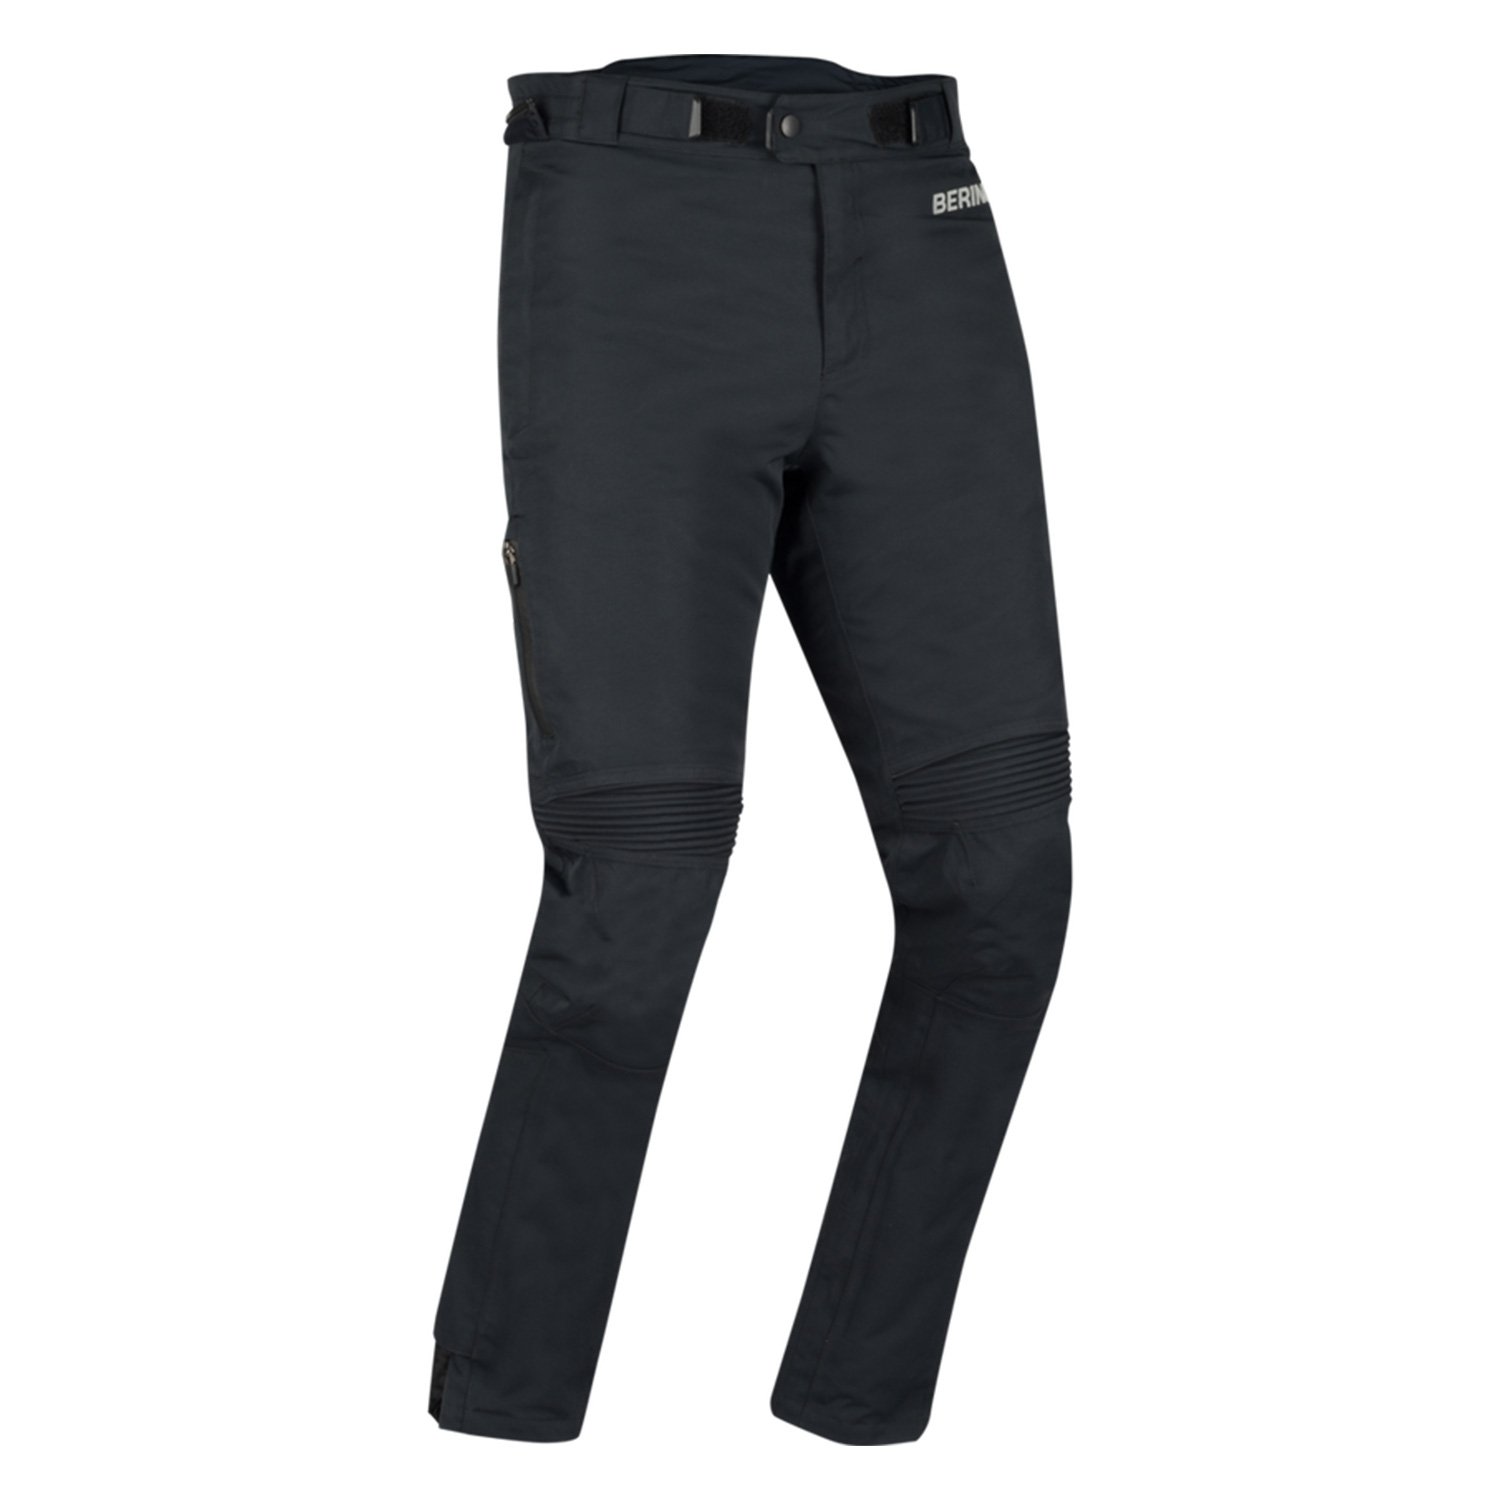 Image of Bering Zephyr Trousers Black Talla L